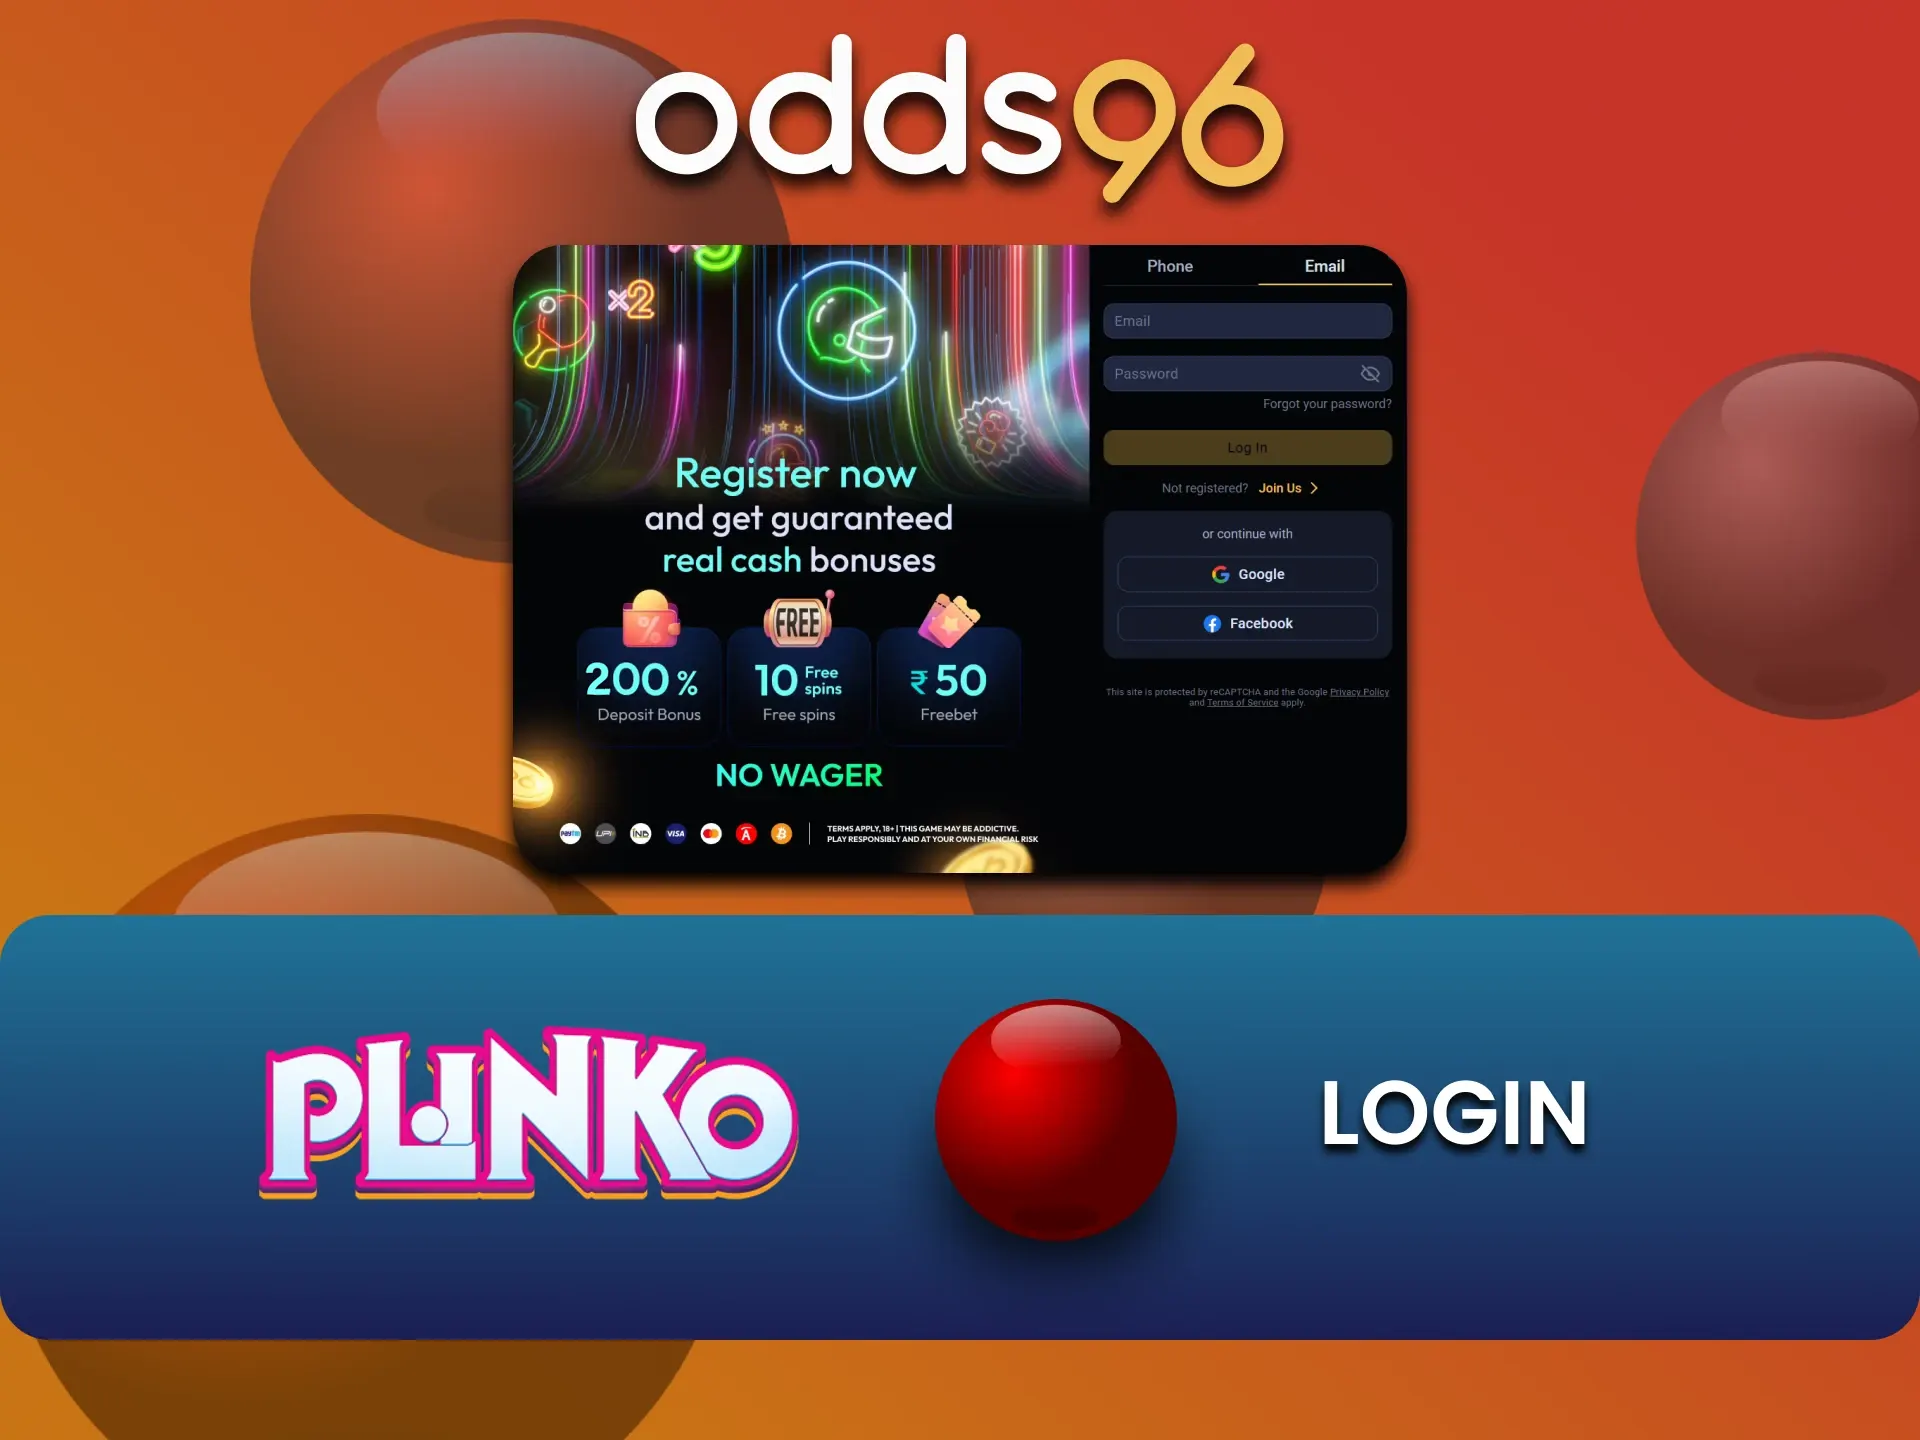 Log into your odds96 account and start playing Plinko.